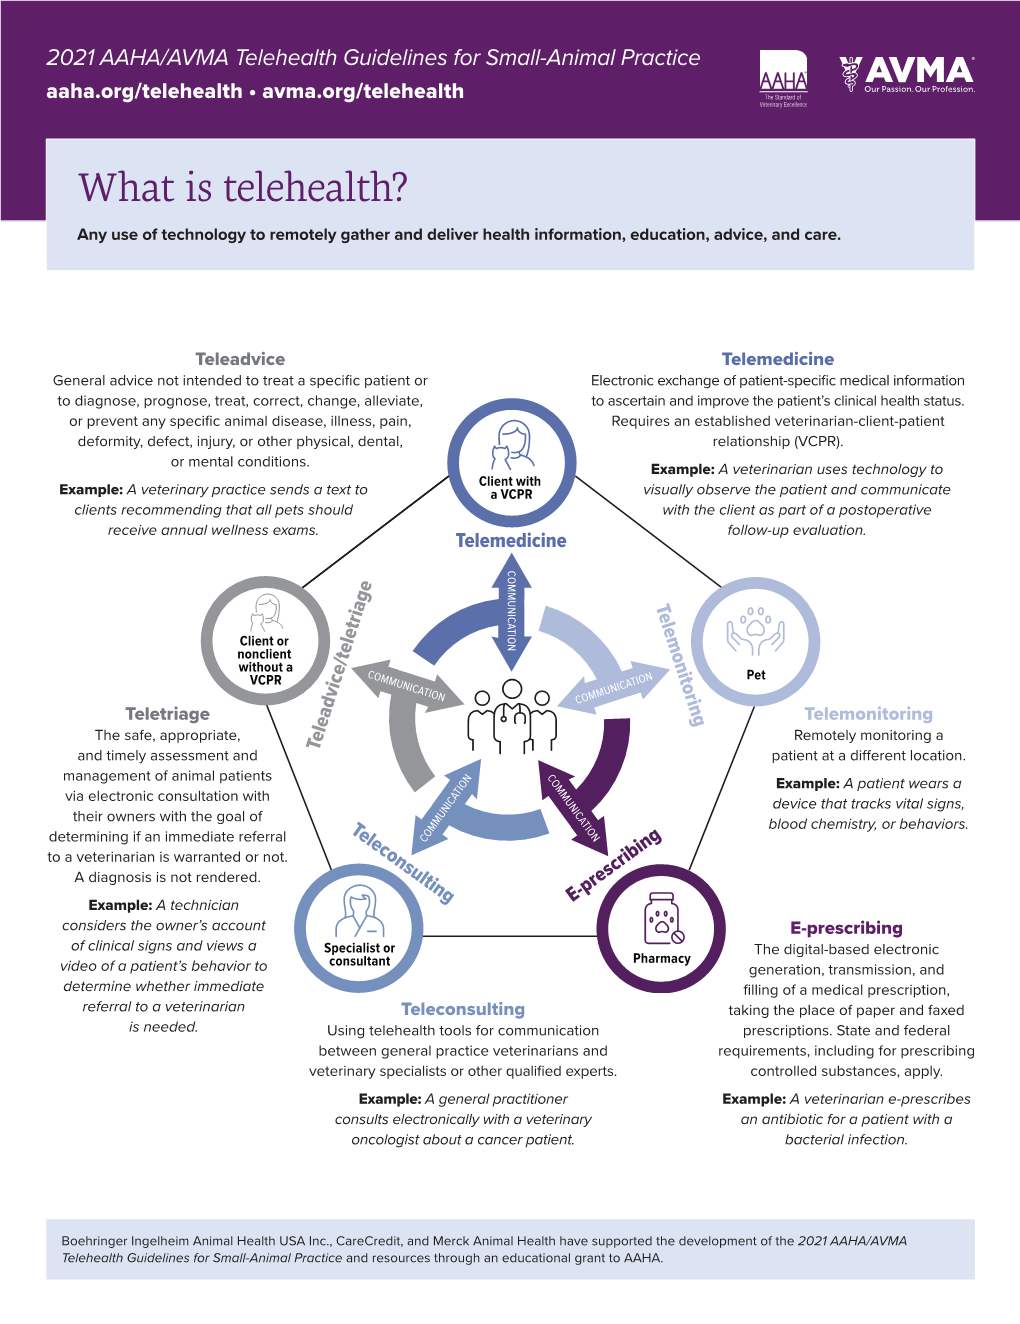 Telehealth in a Small-Animal Practice